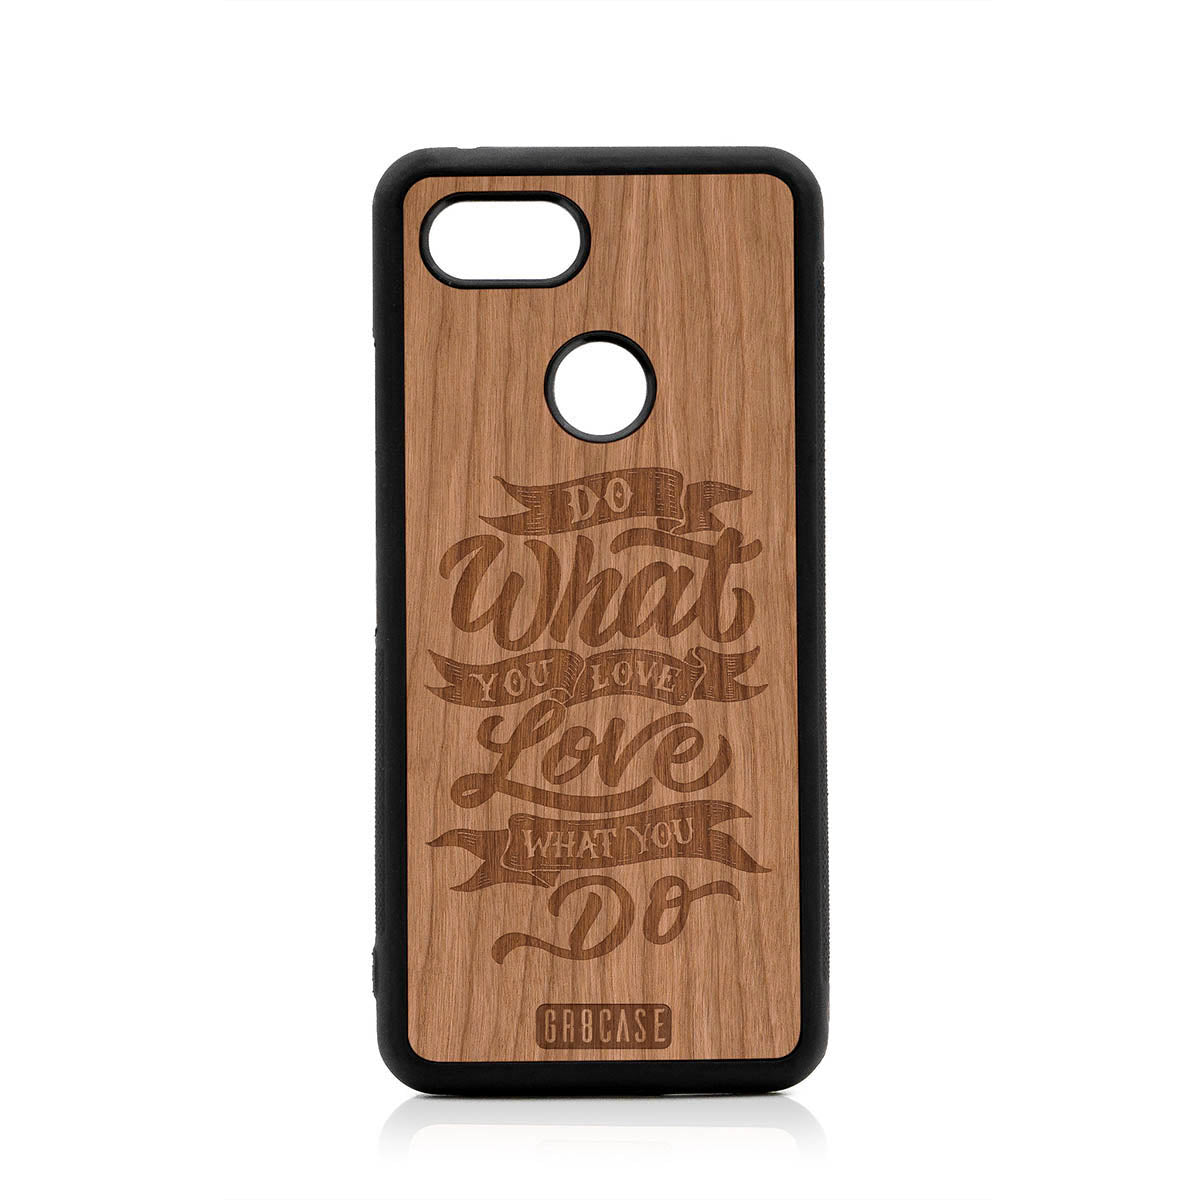 Do What You Love Love What You Do Design Wood Case For Google Pixel 3 by GR8CASE